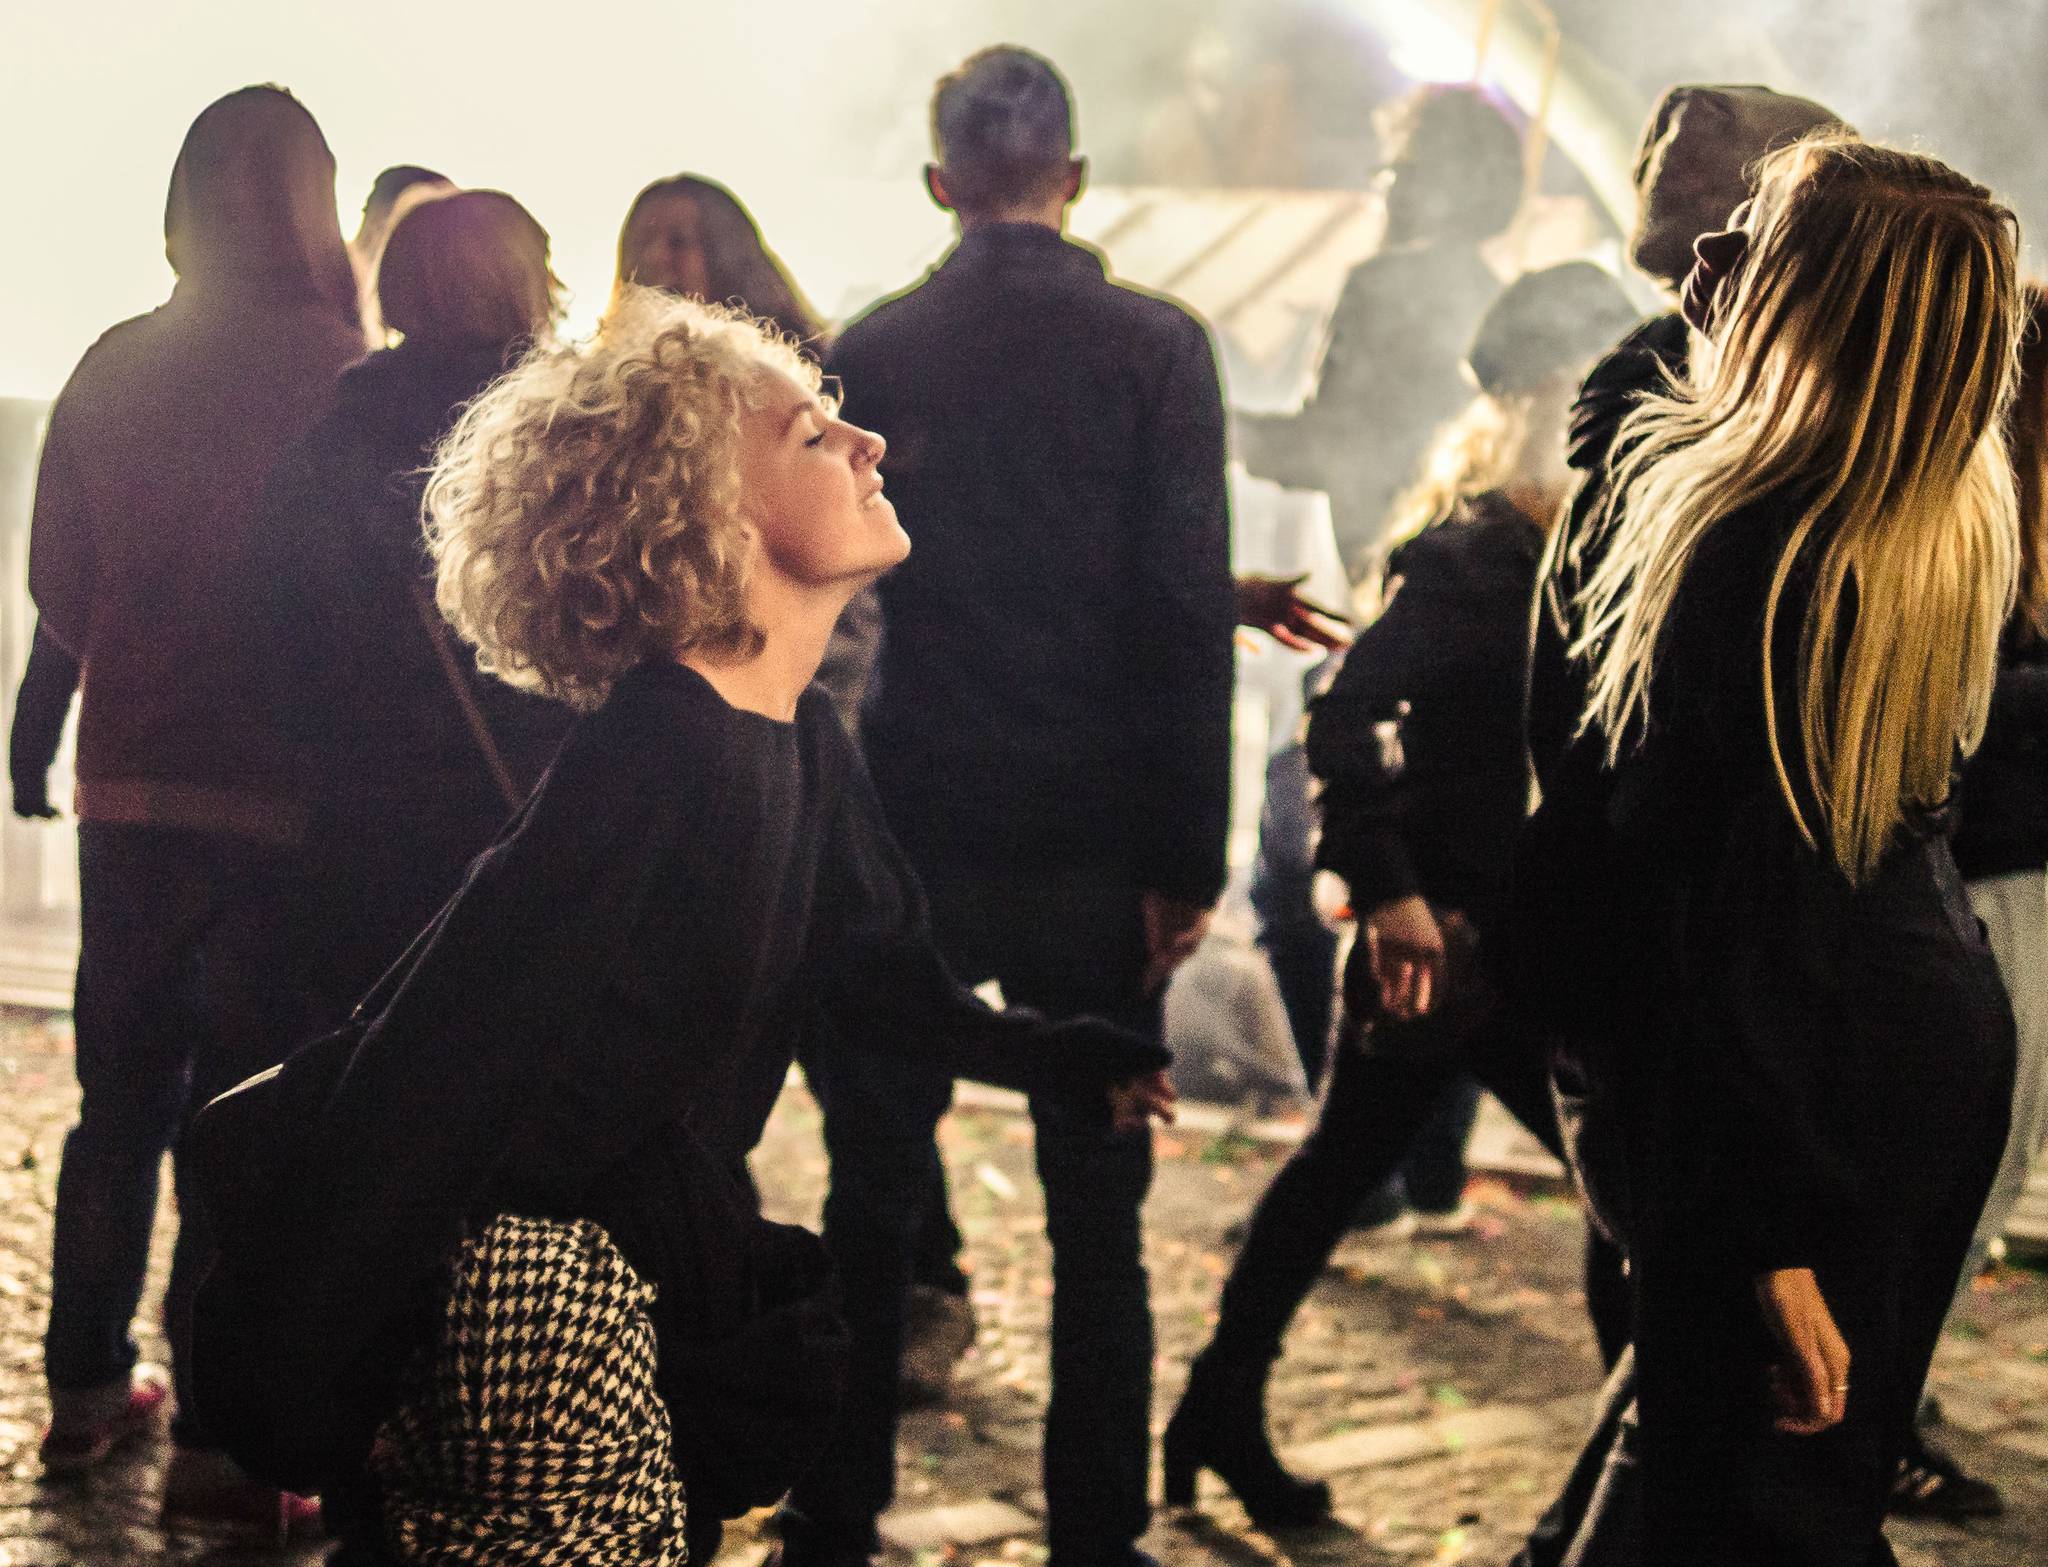 Berghain: a serious approach to partying